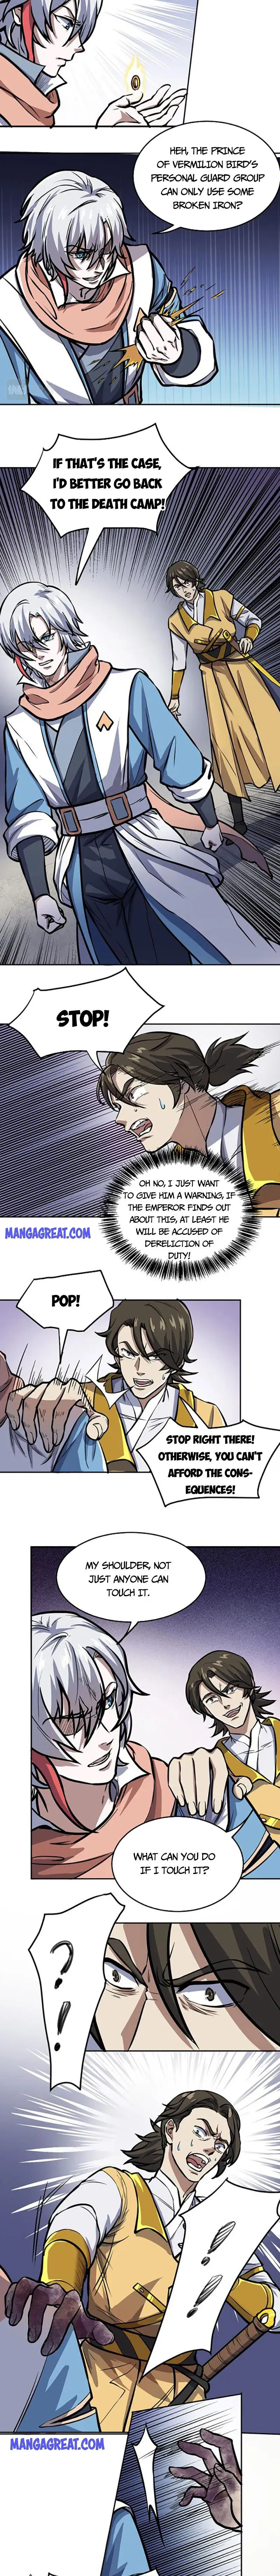 Martial Arts Reigns Chapter 457 page 3